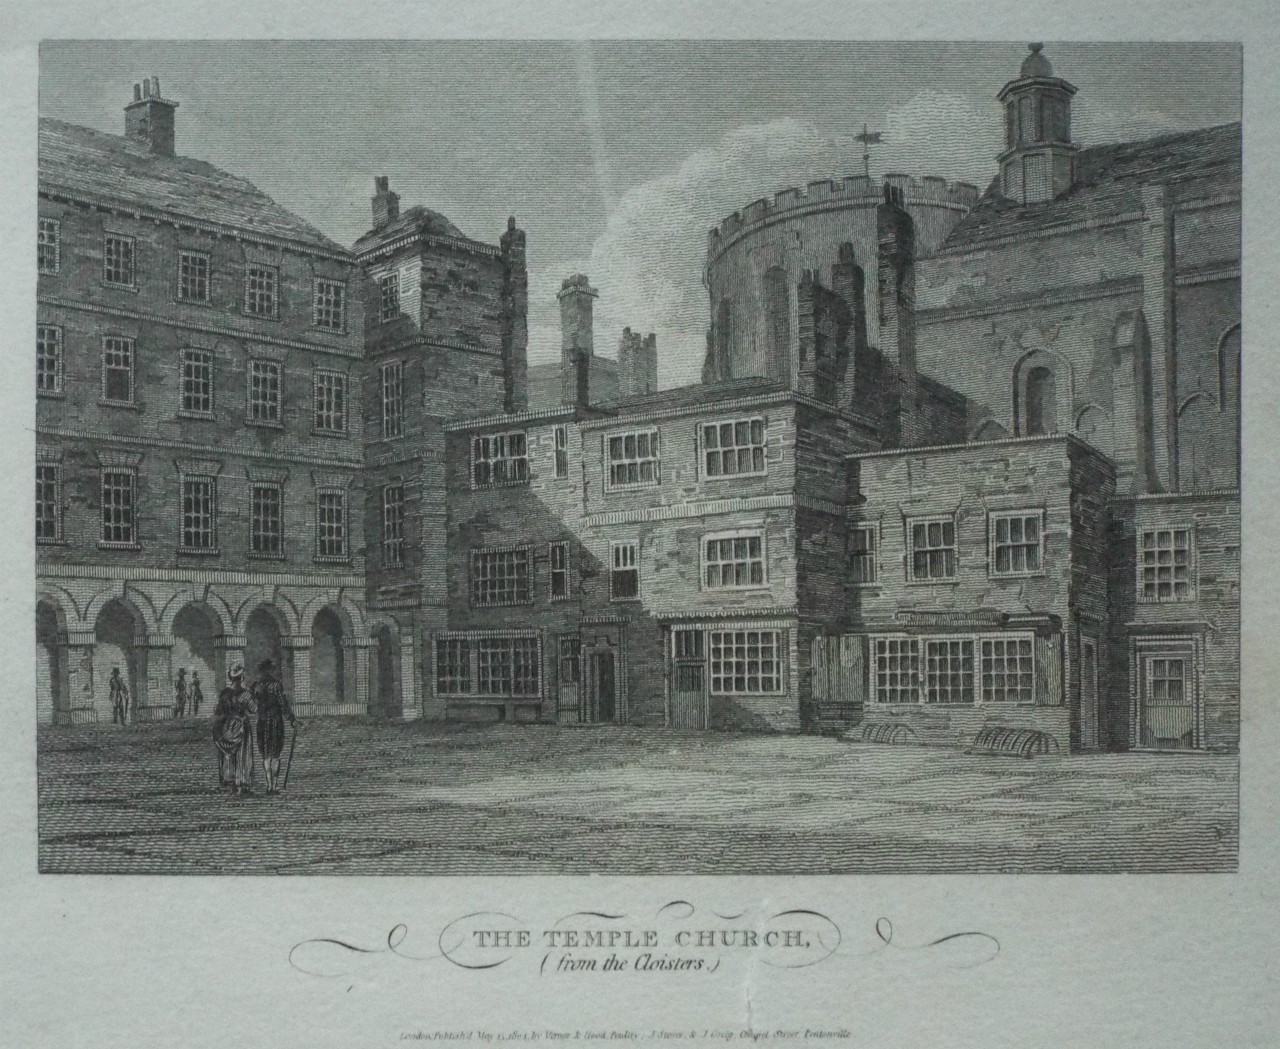 Print - The Temple Church, (from the Cloisters.)